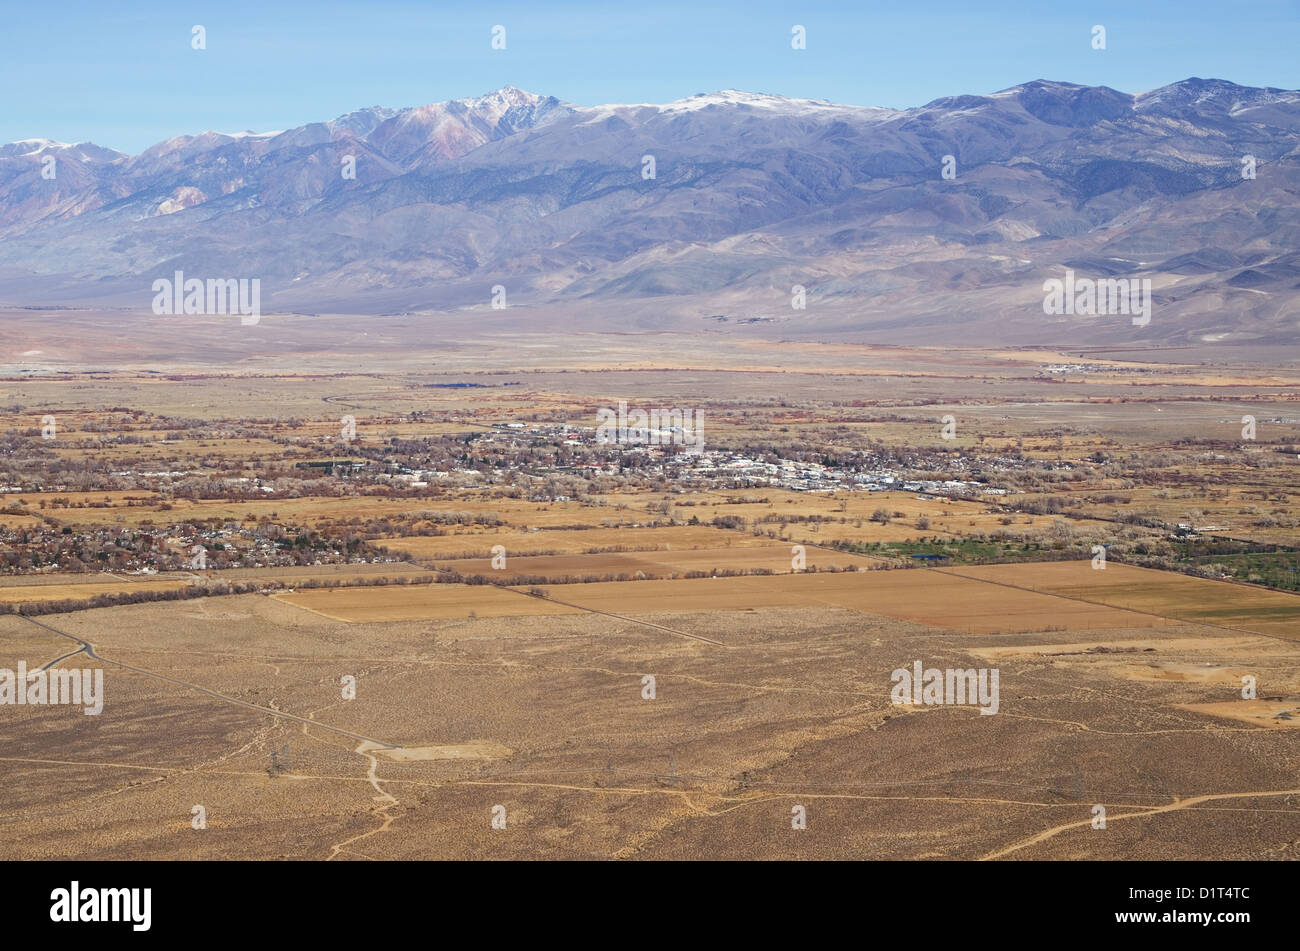 the city of Bishop and the White Mountains viewed from above in December Stock Photo